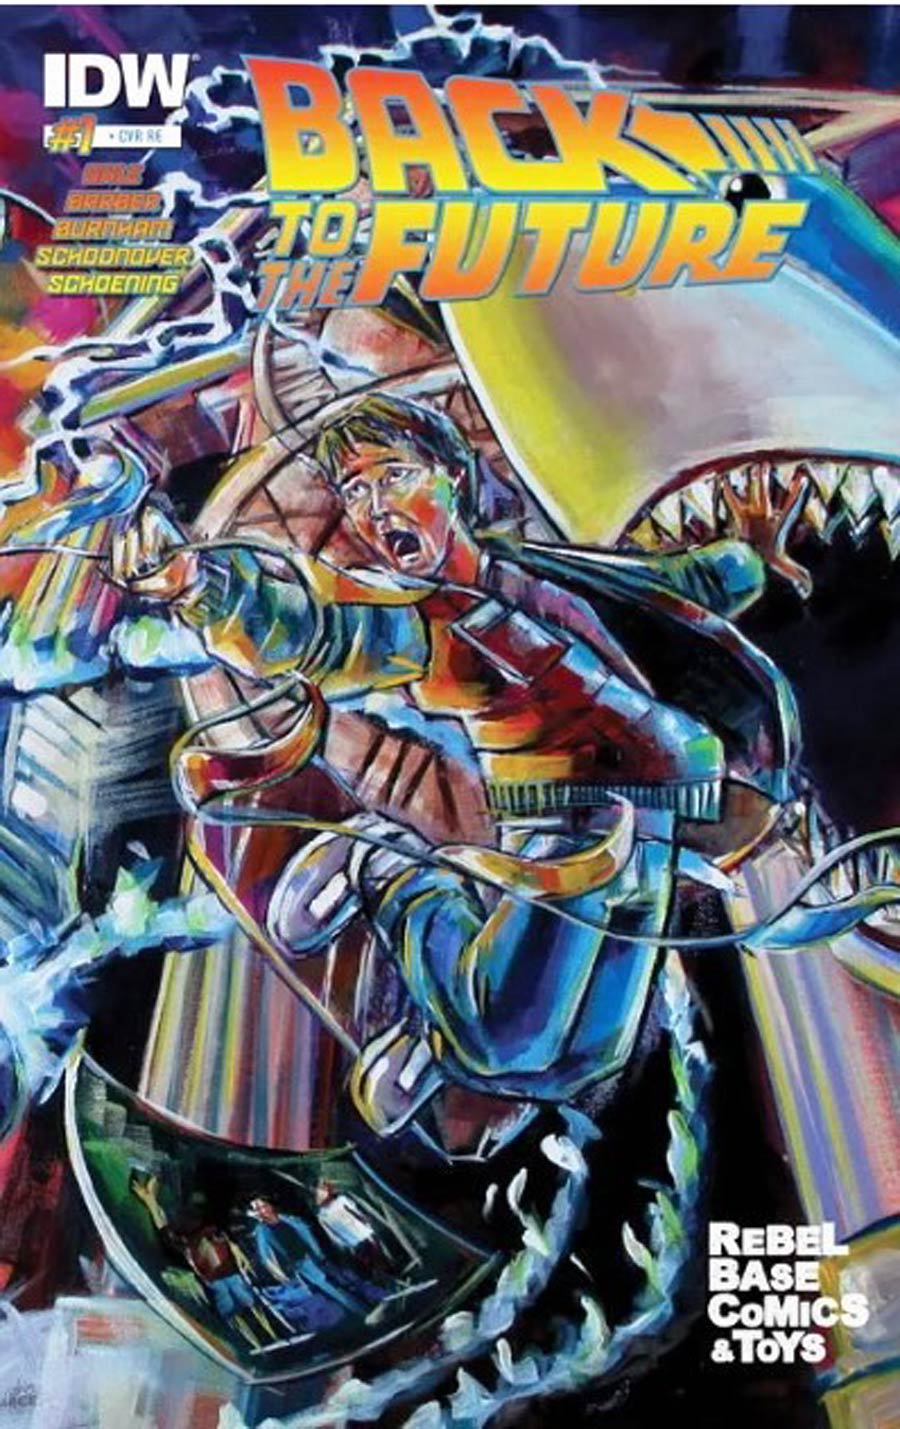 Back To The Future Vol 2 #1 Cover O Rebel Base Comics & Toys Variant Cover